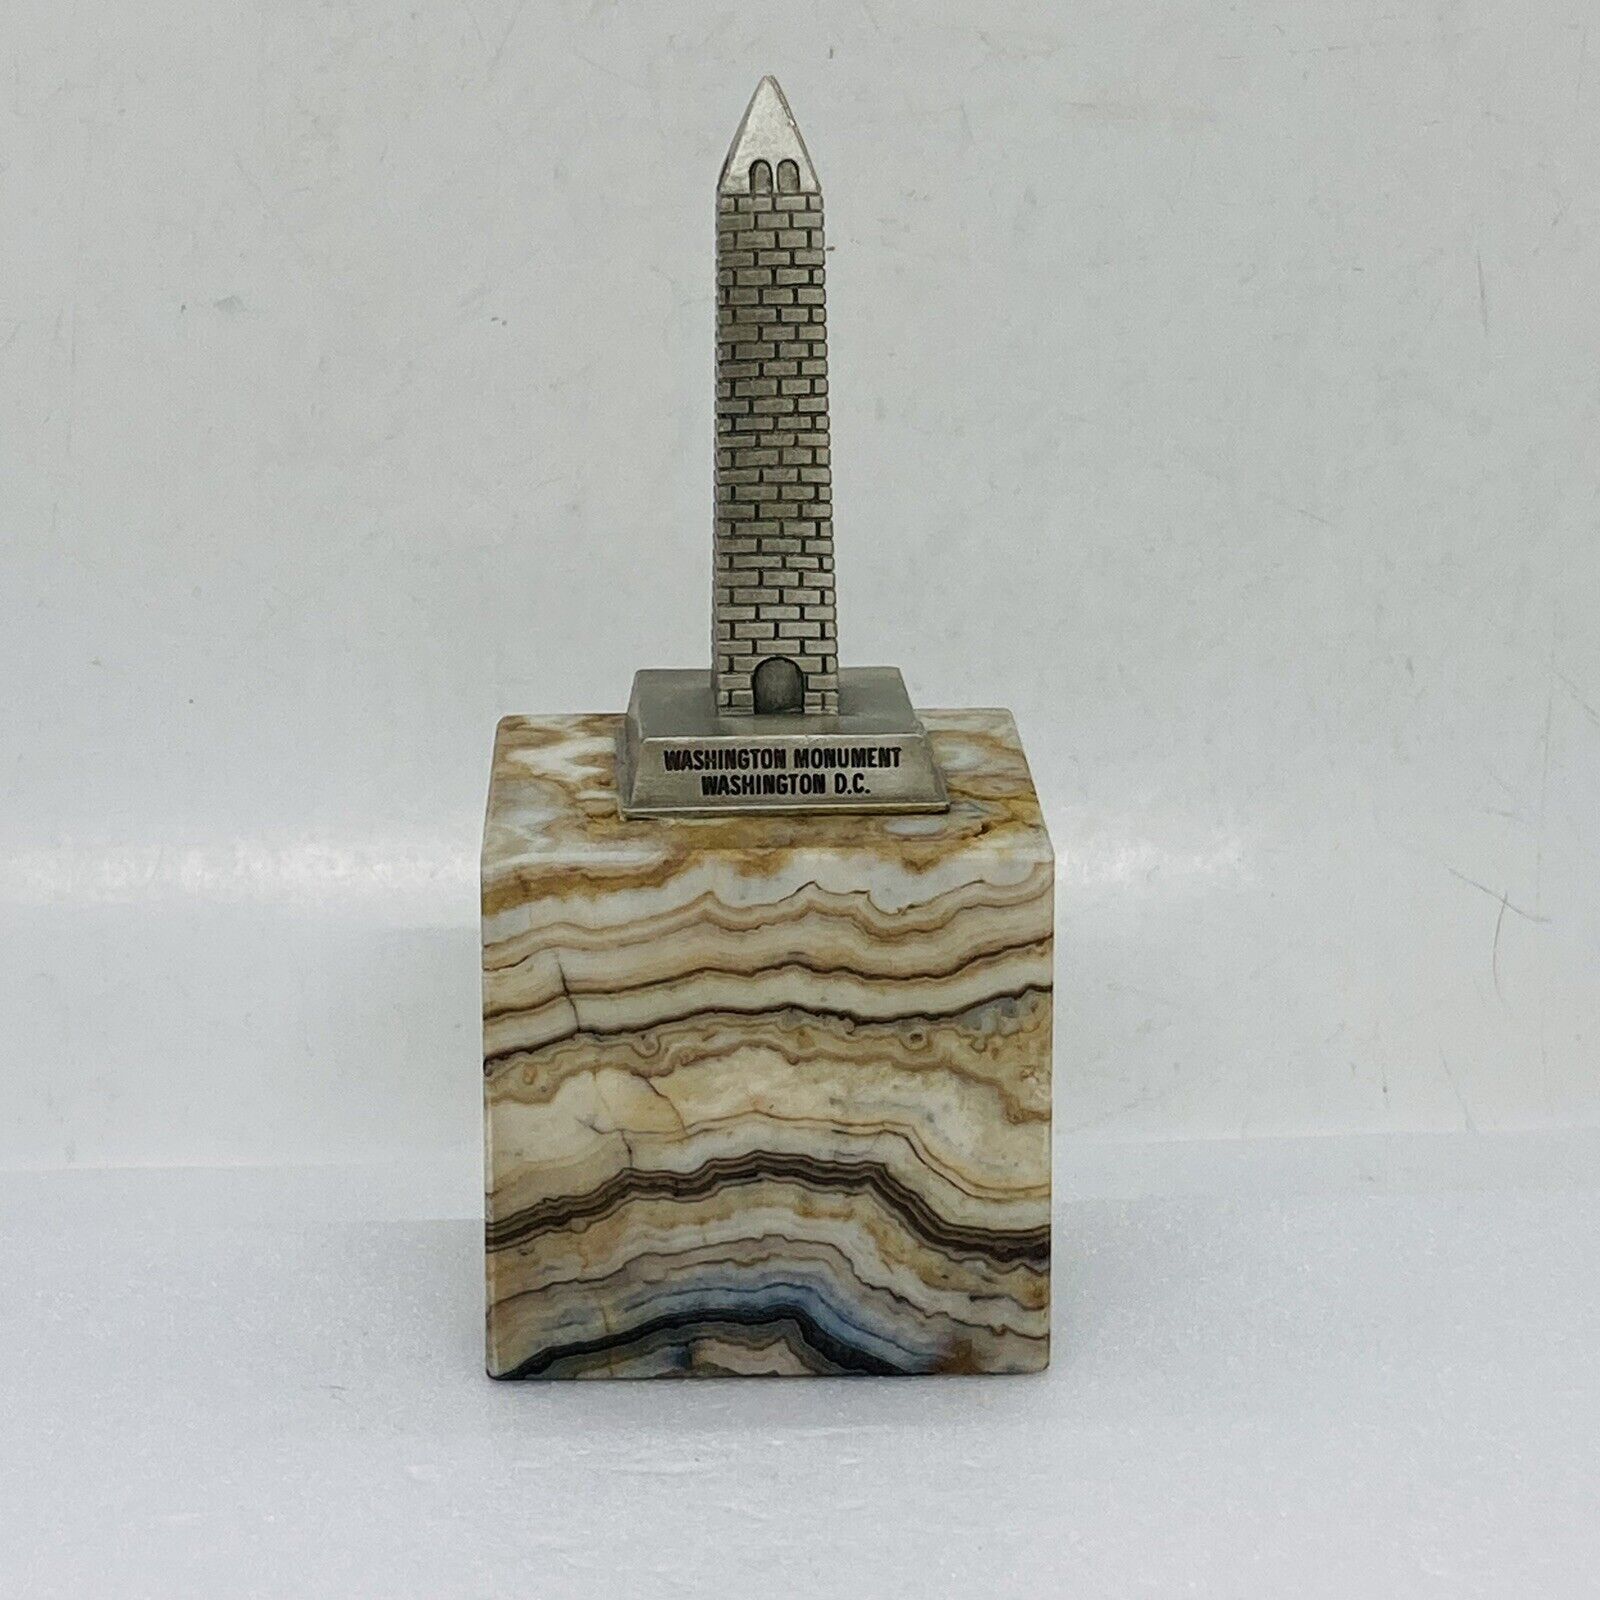 Rare Washington Monument Pewter Statue Agate Stone Paperweight Tabletop Decor 6